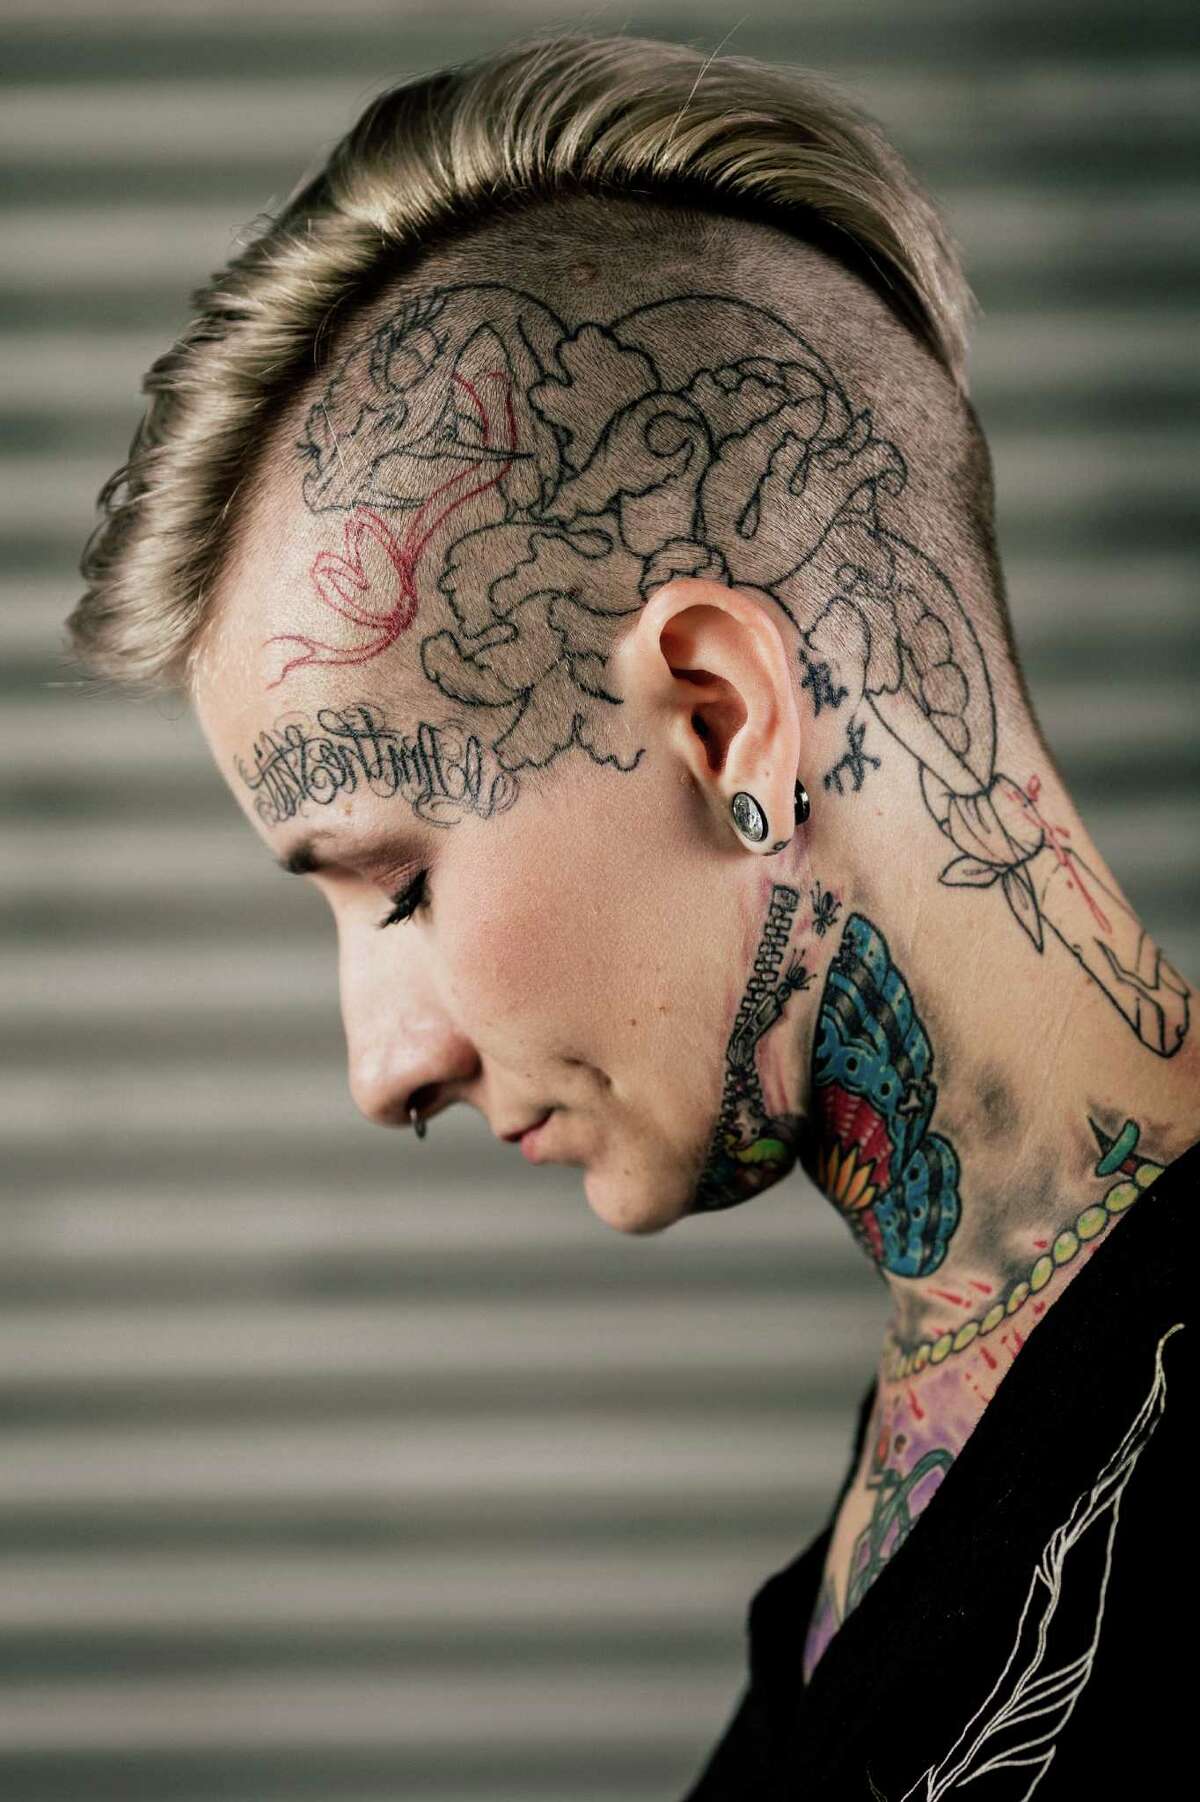 Are you a tattoo fanatic? Gear up for the Seattle Tattoo Expo this weekend  | king5.com